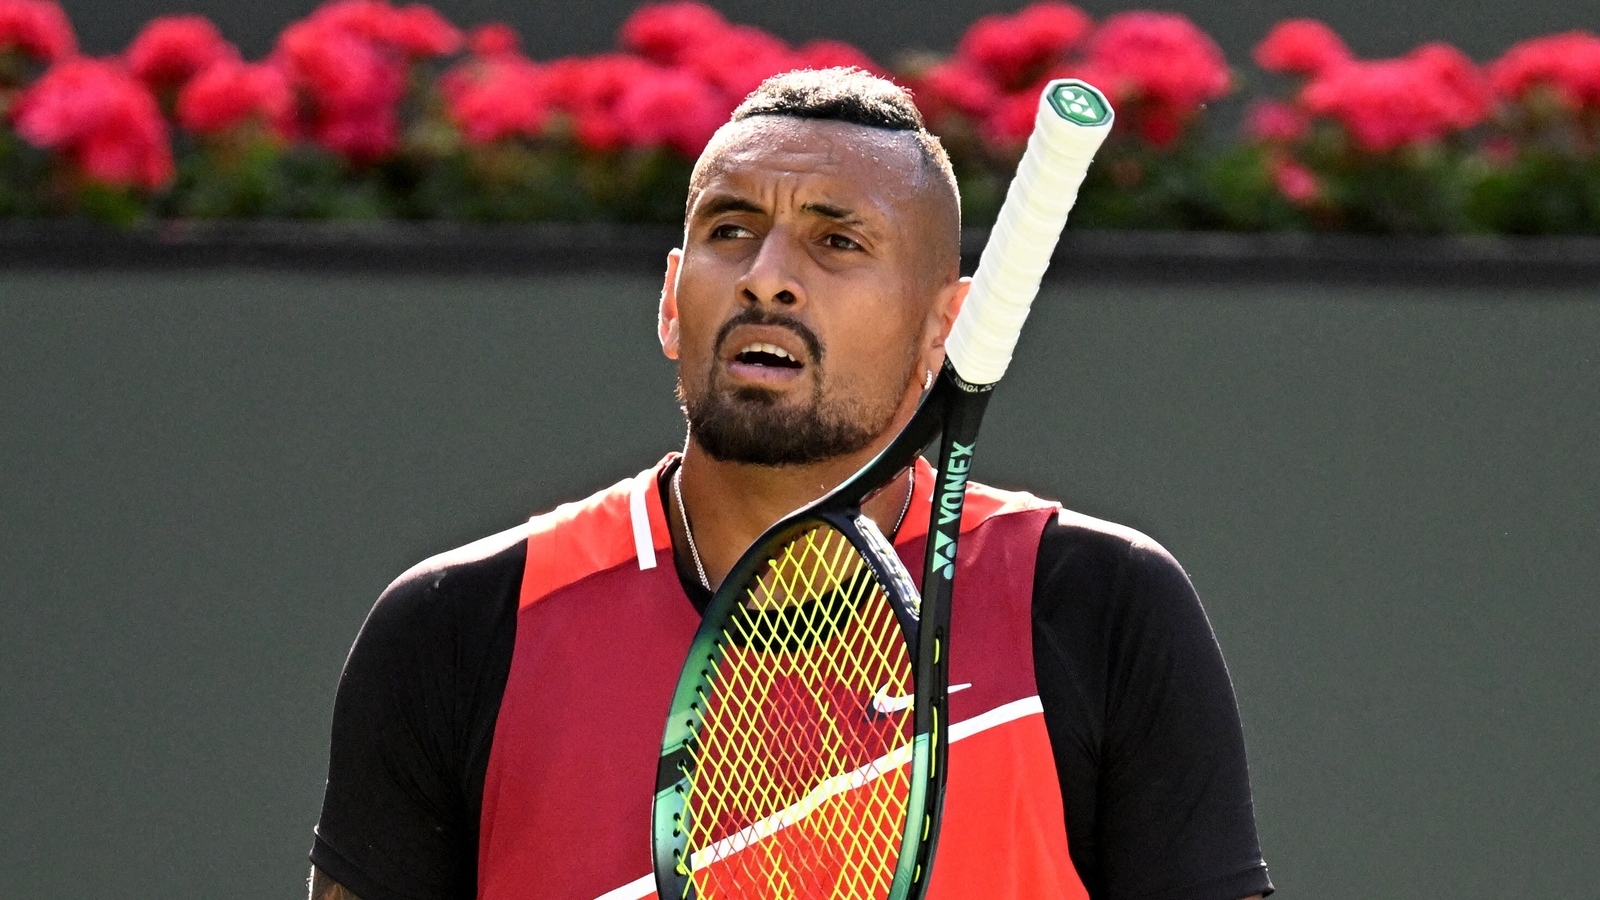 Nick Kyrgios’s classy gesture after nearly hitting ball kid with racket after Rafael Nadal clash: ‘Got a new friend’